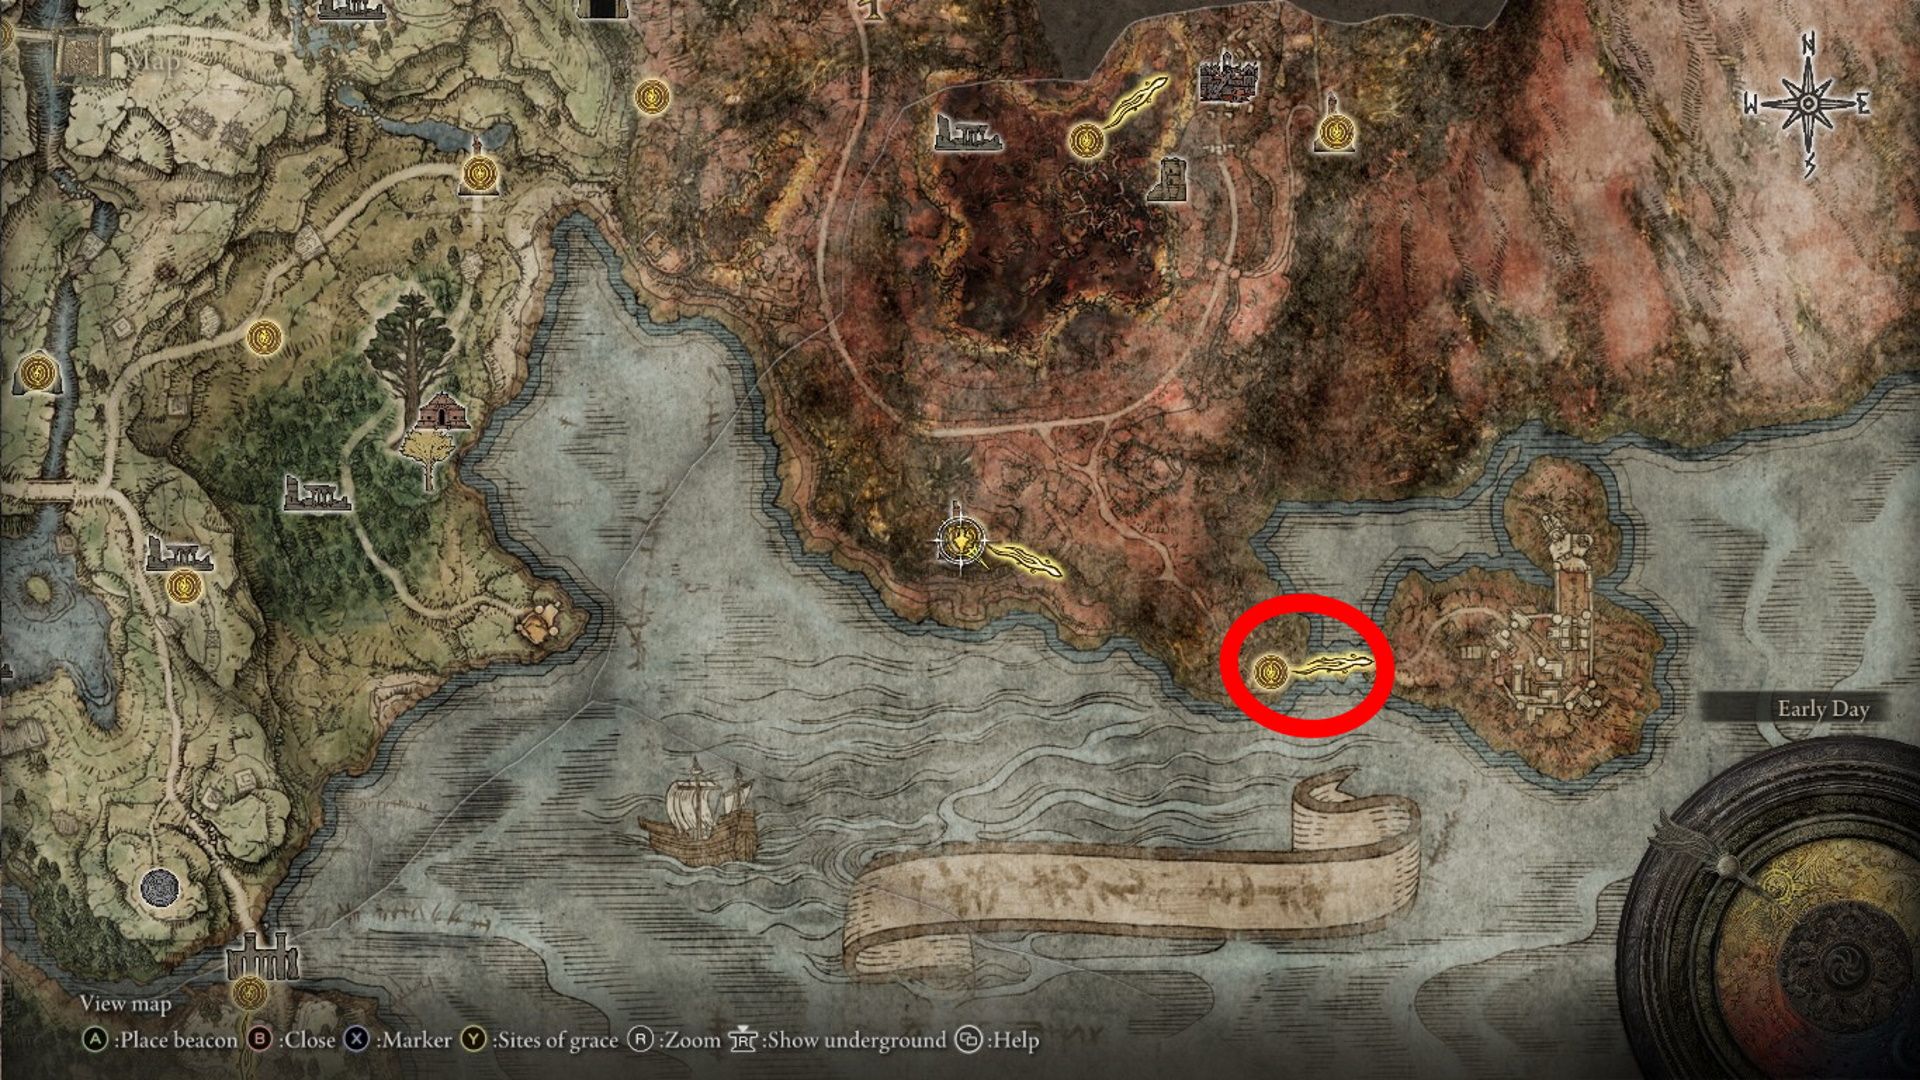 Map of Caelid showing Redmane Castle's location